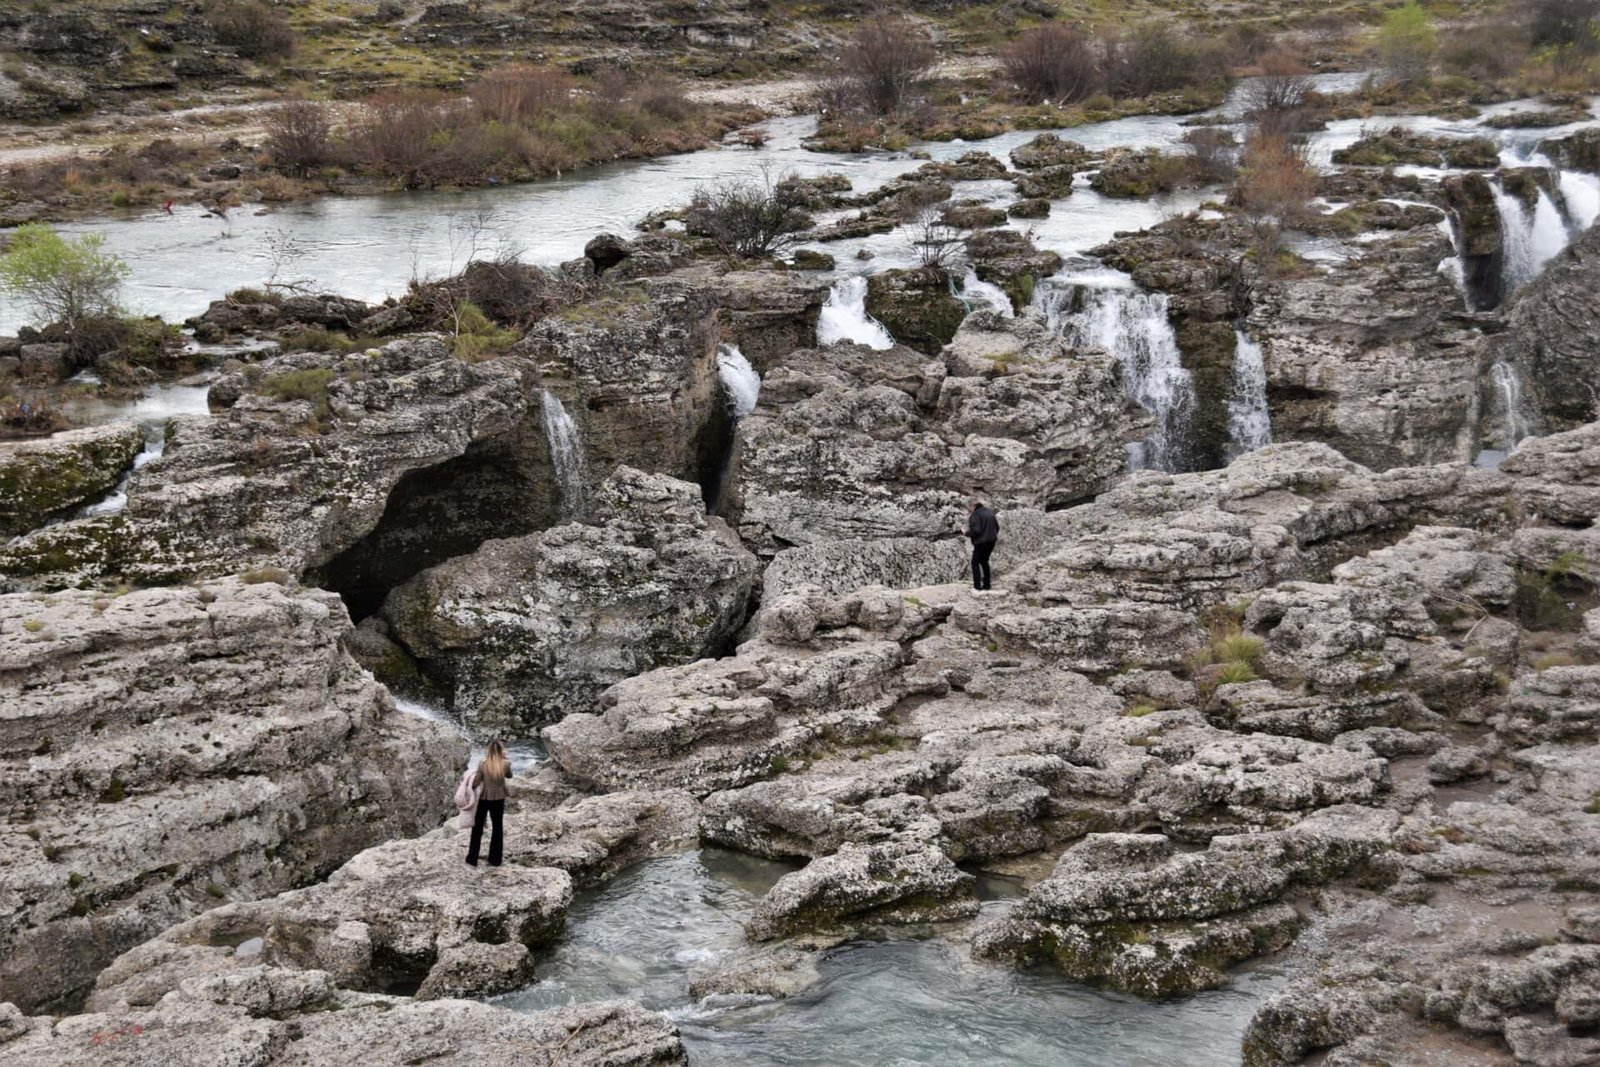 two people stand at the ede of a canyon created by a rushing river